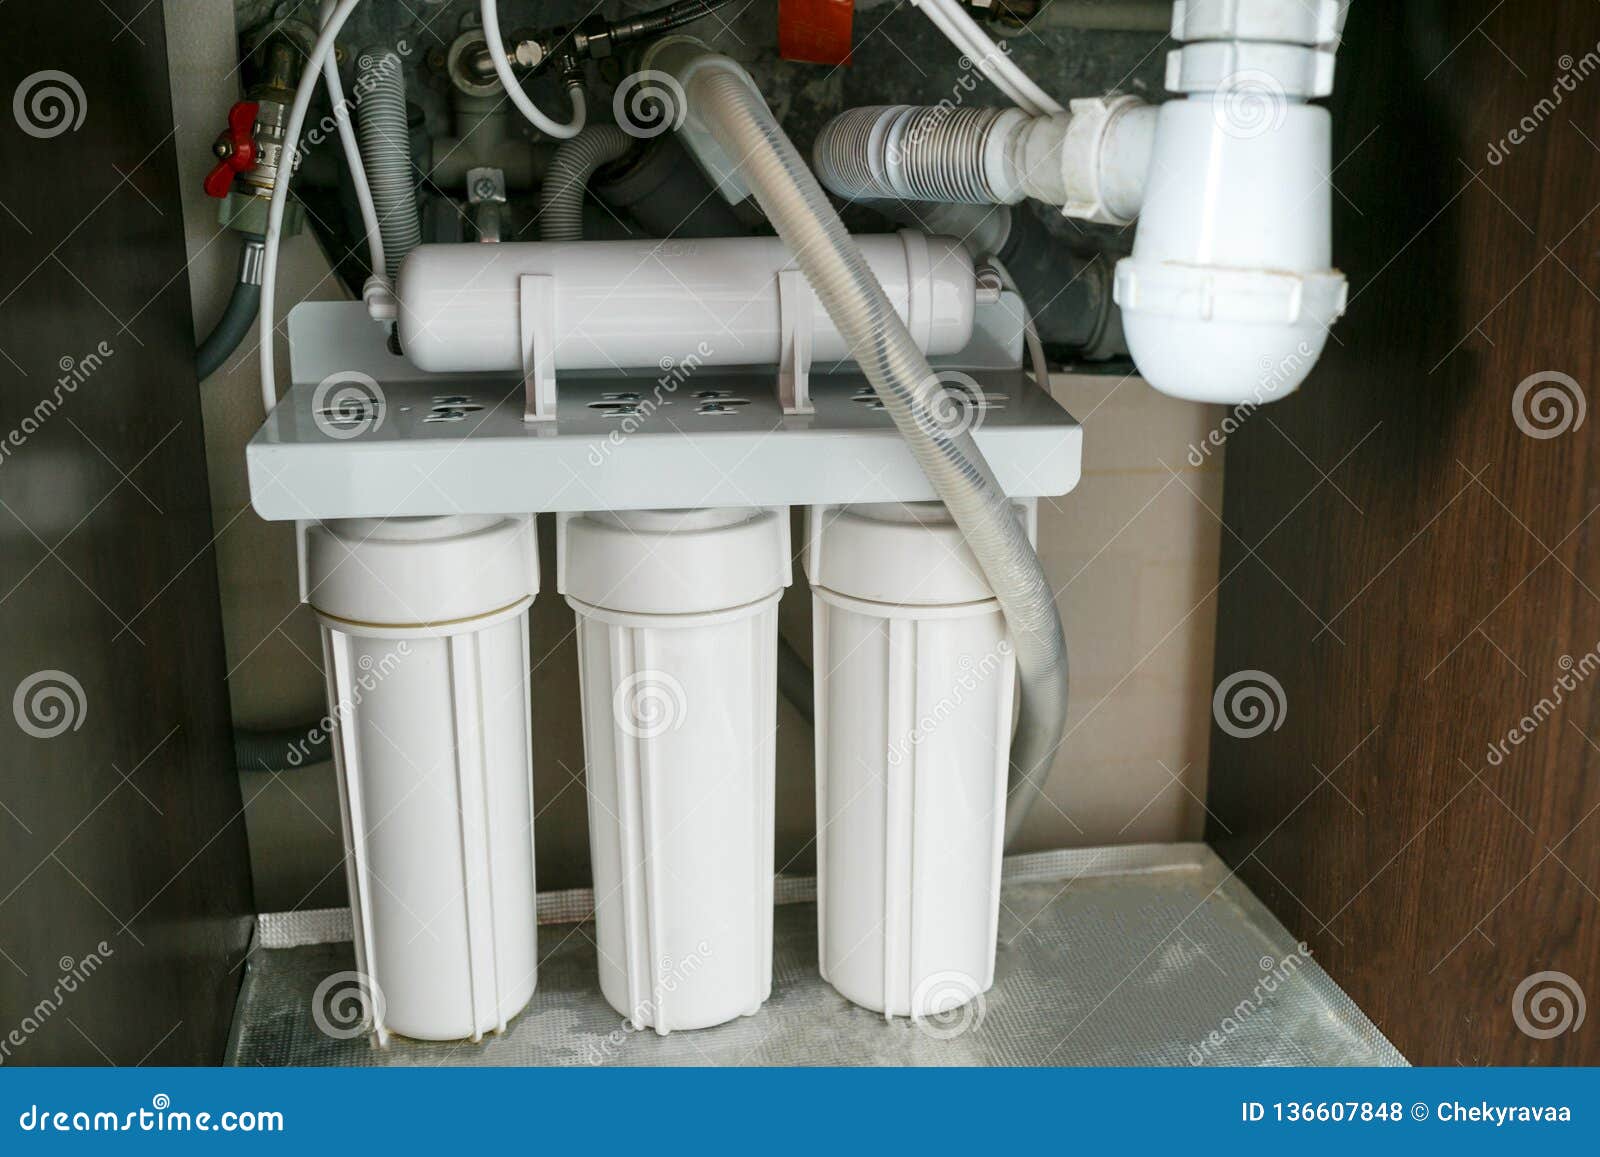 reverse osmosis water purification system at home. installation of water purification filters under kitchen sink in cupboard.